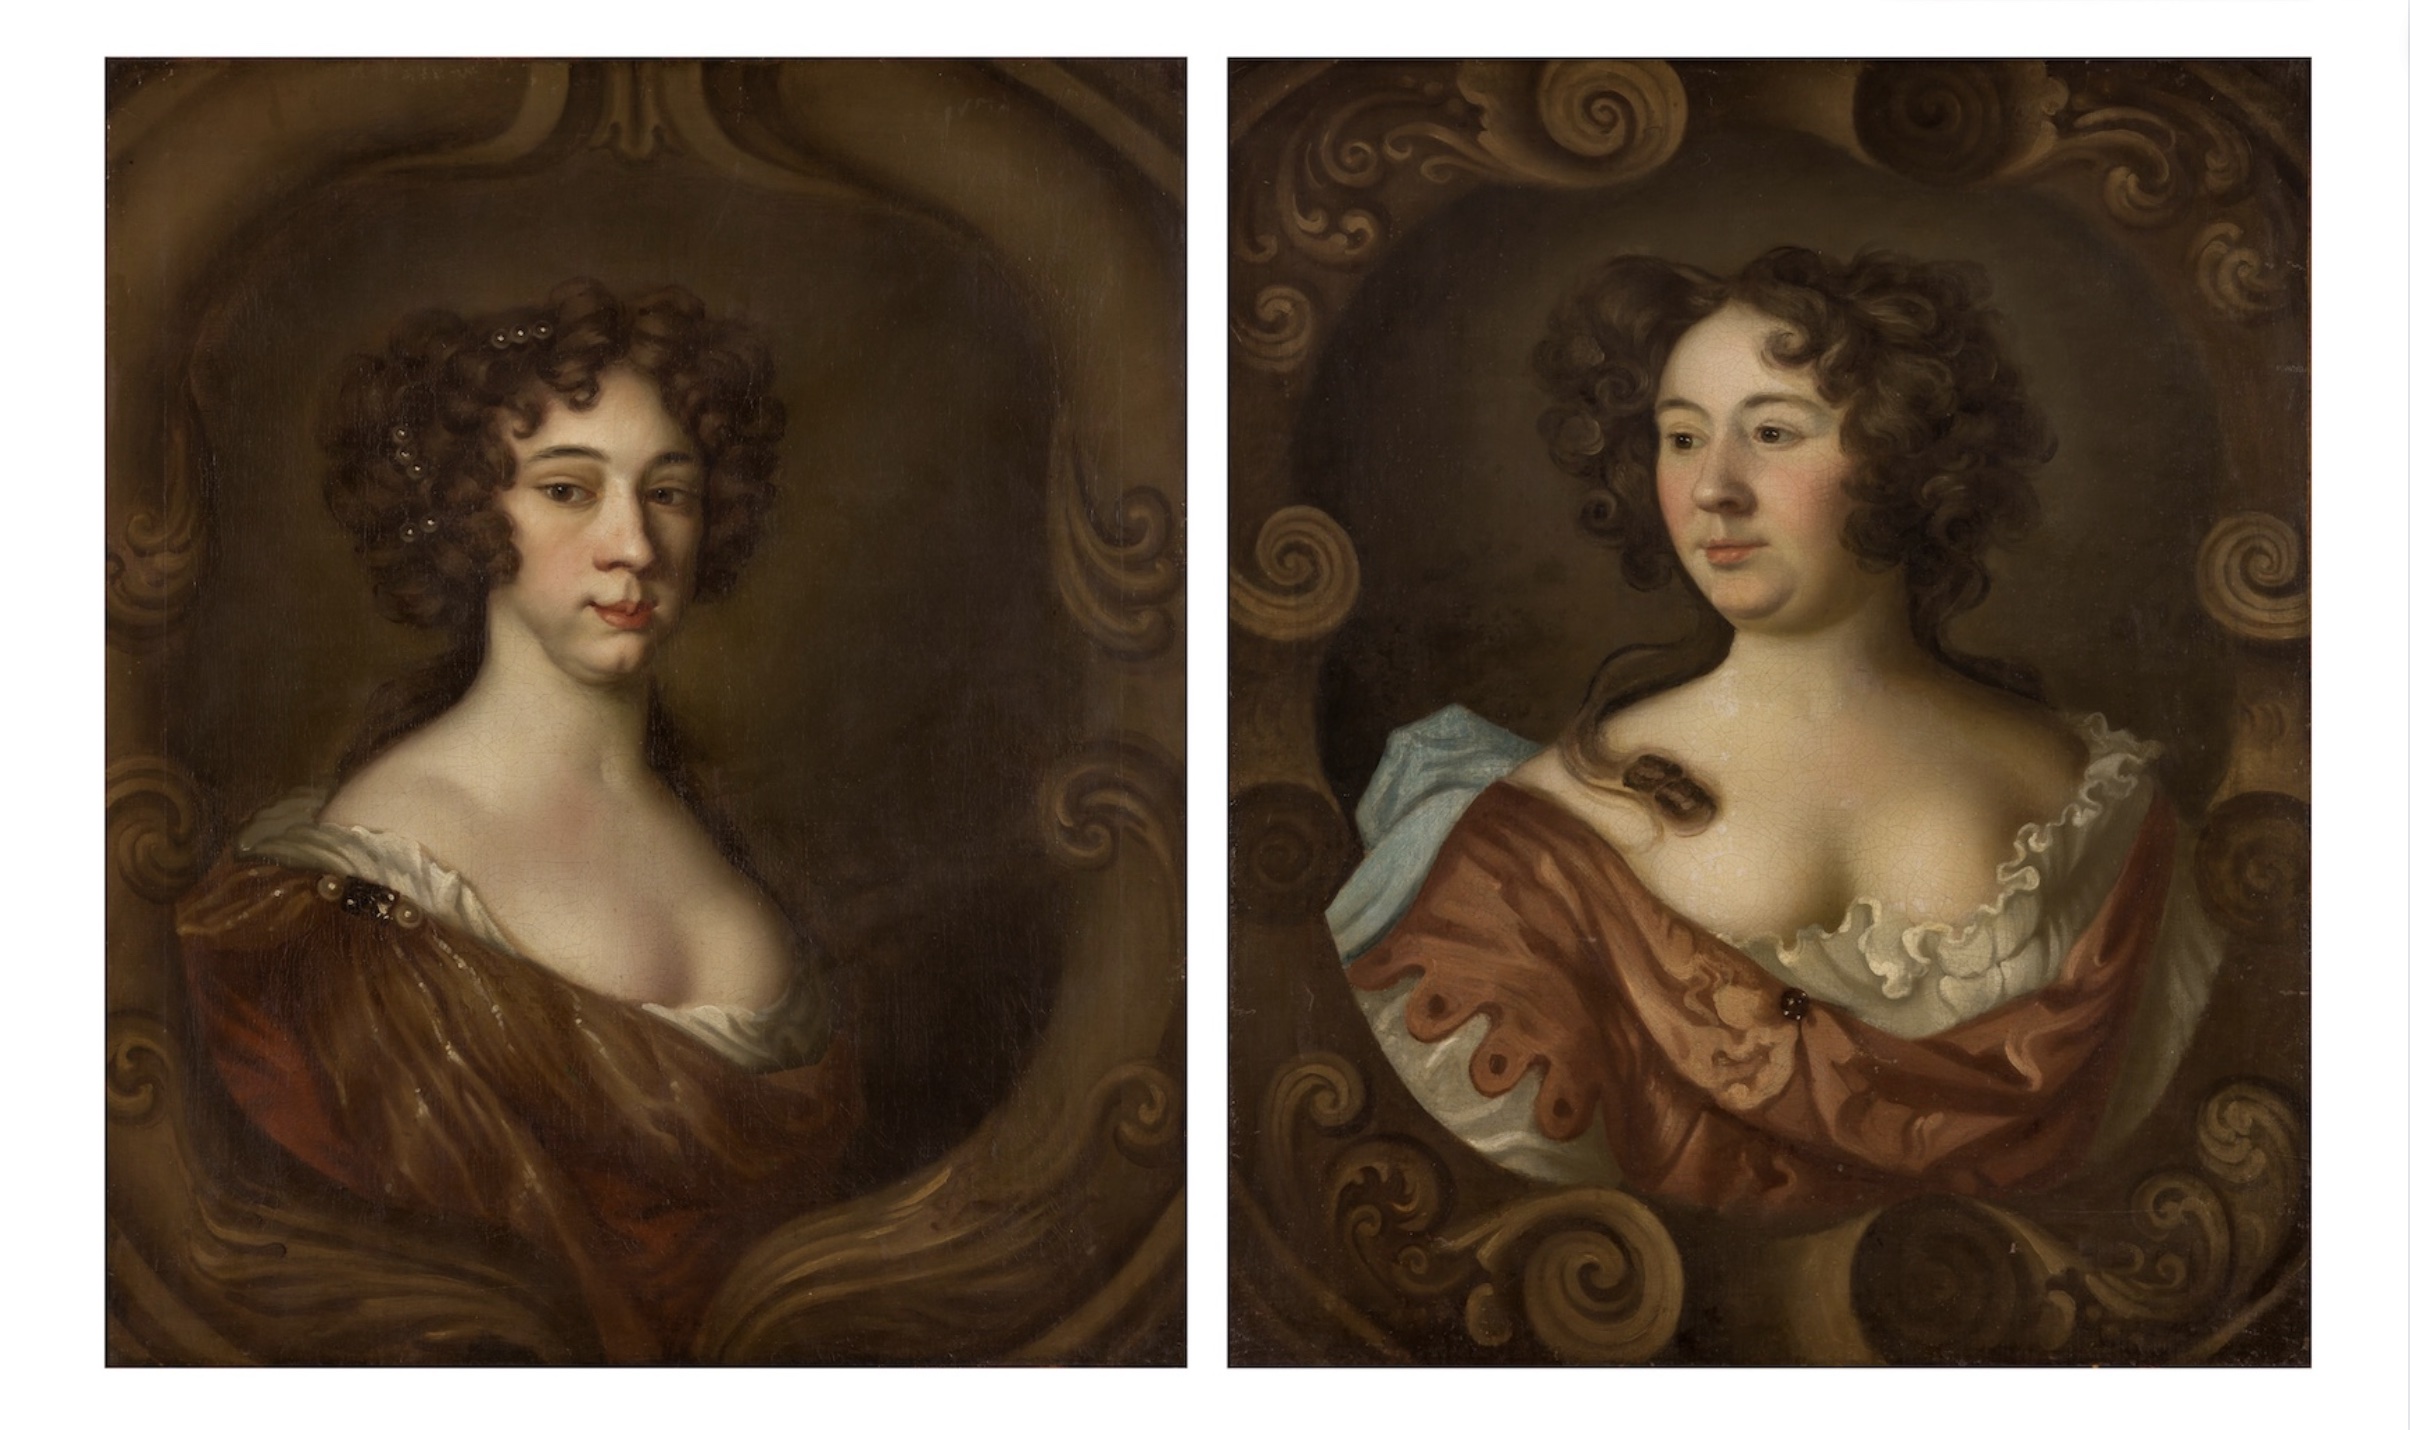 Portraits associated with Mary Beale in sale – Antique Collecting